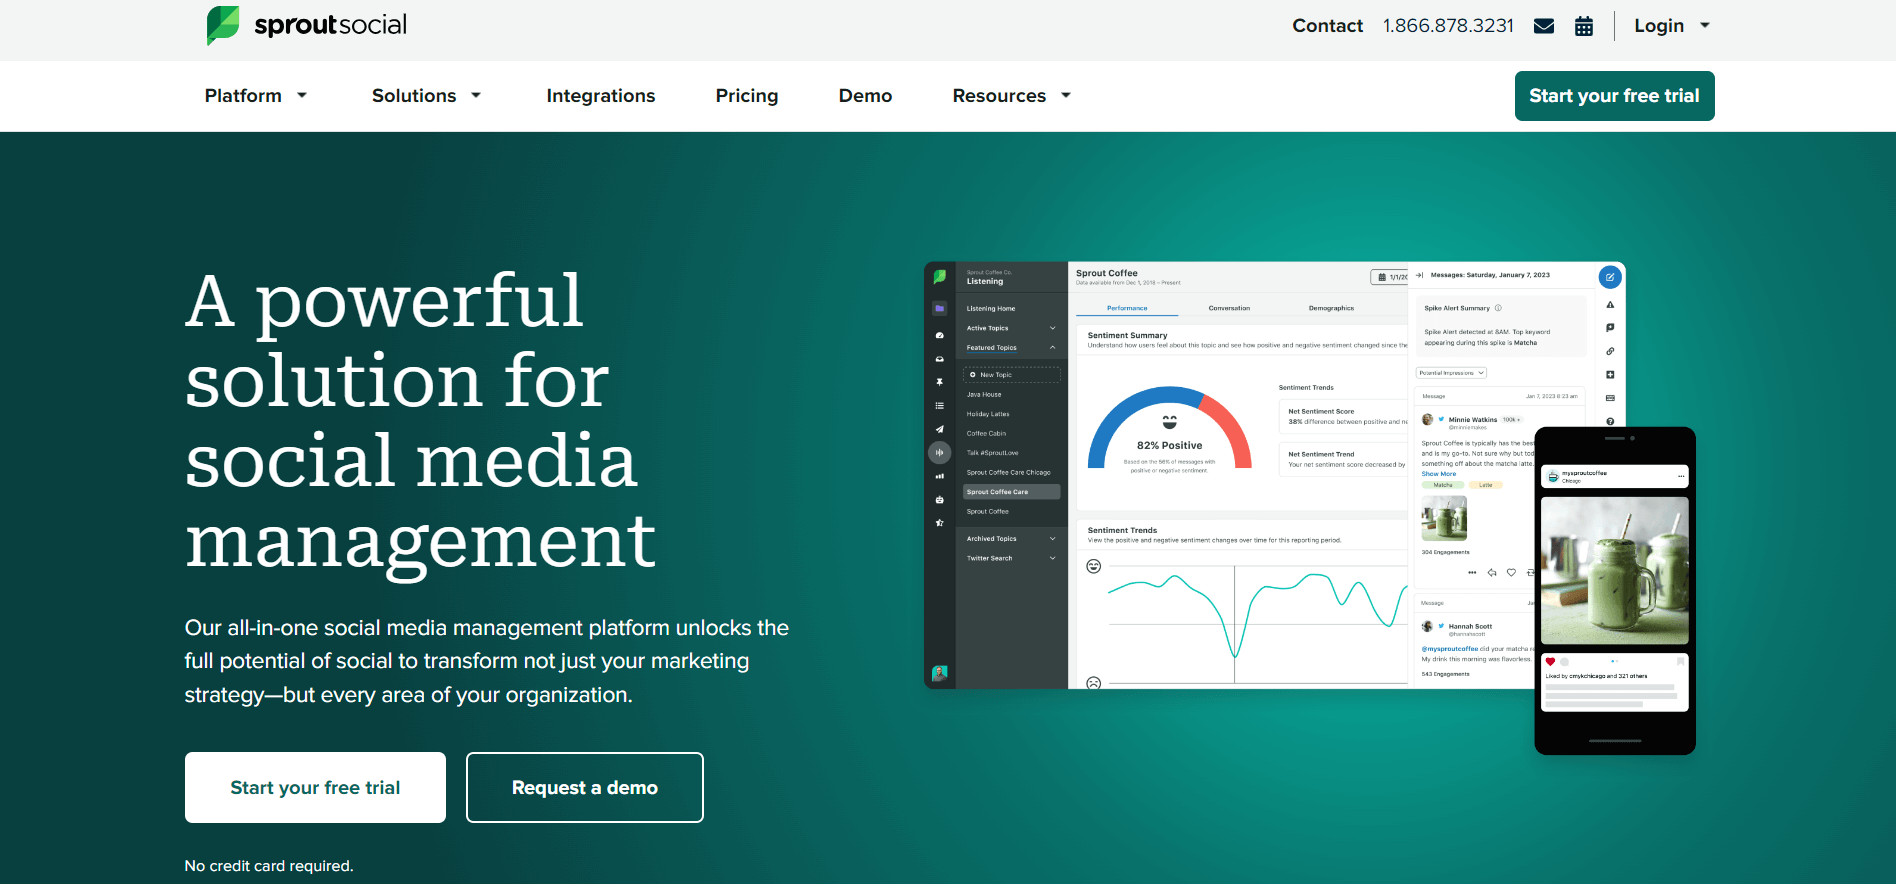 SproutSocial homepage with image of web and mobile screenshot of reports dashboards.